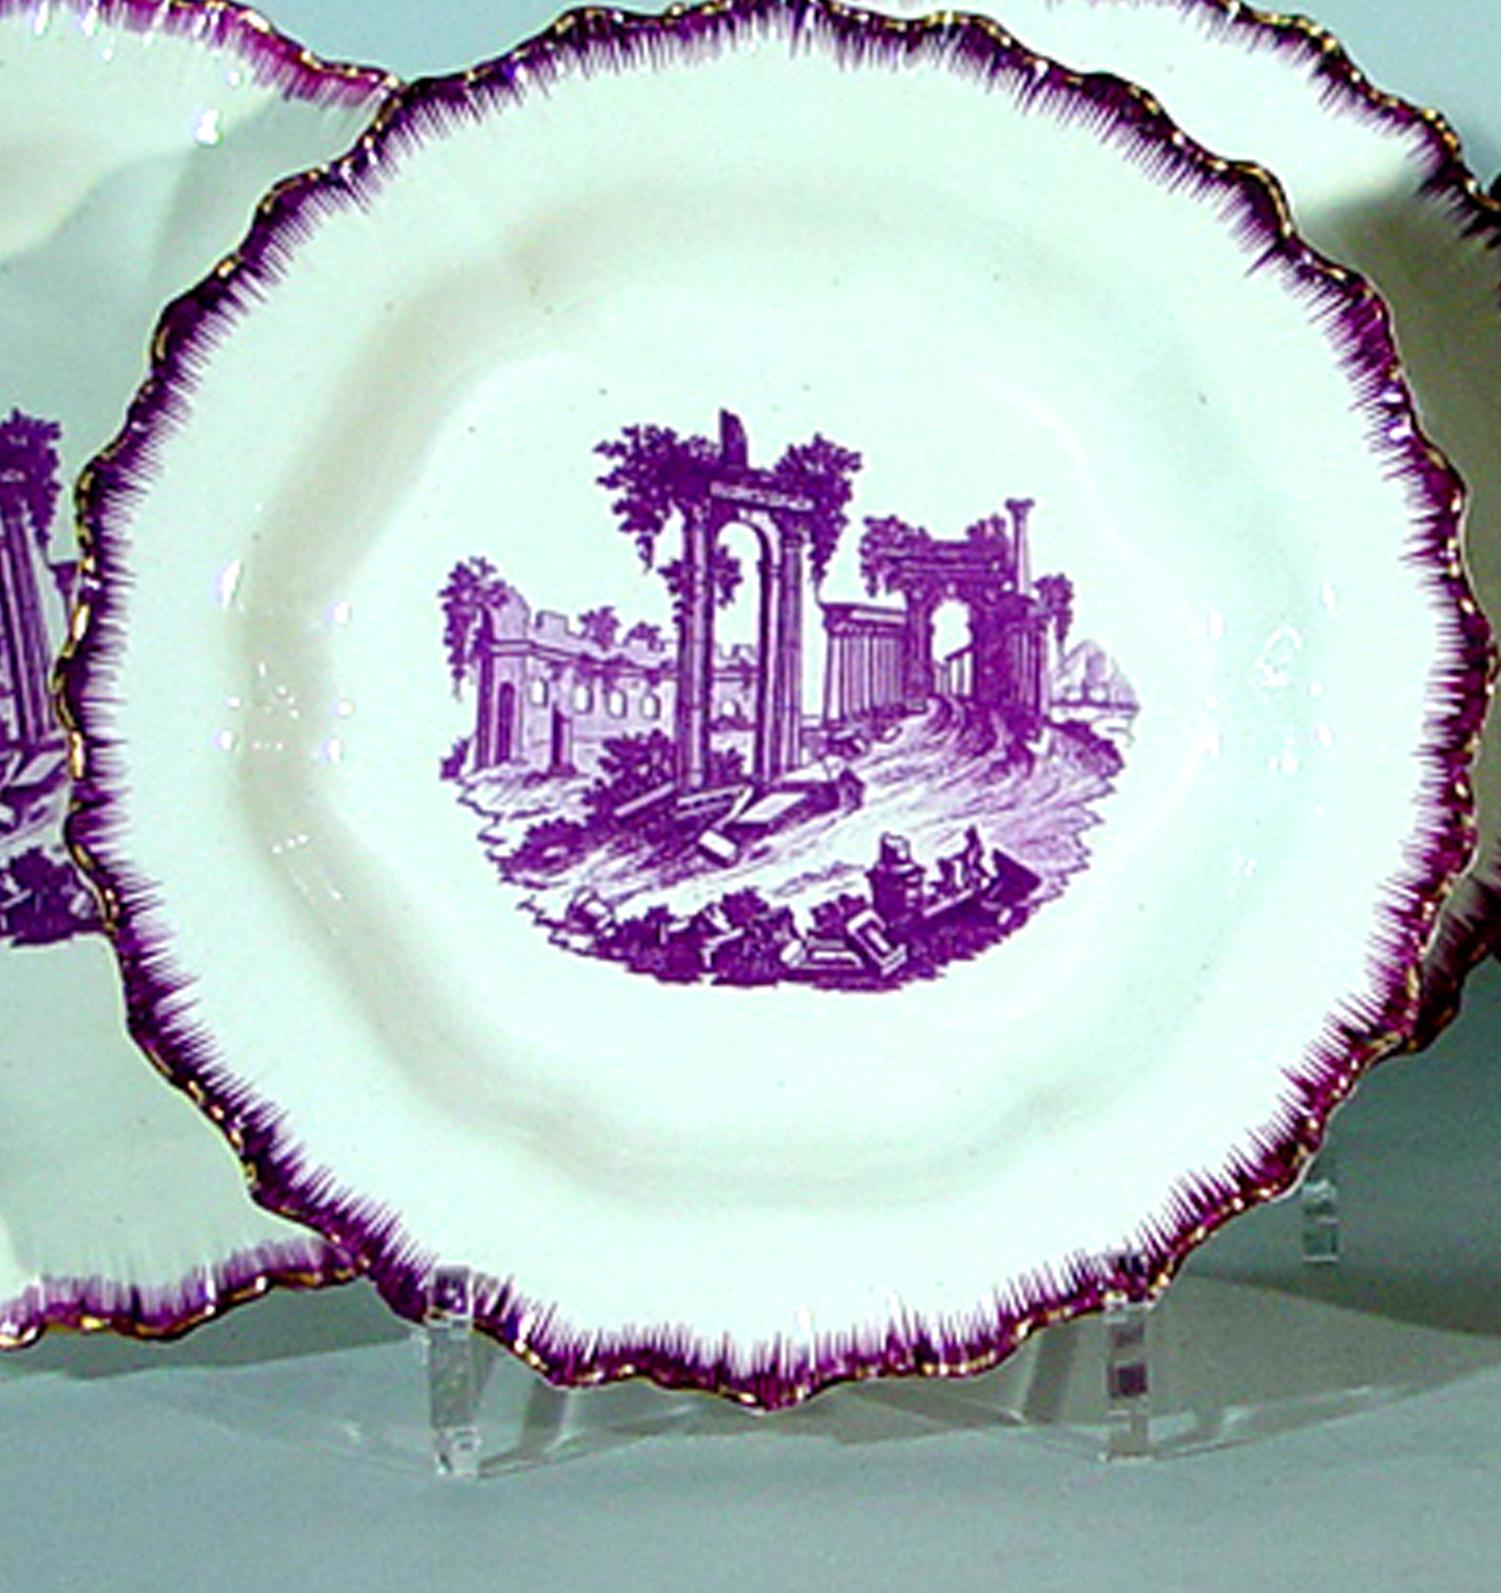 The Neale & Co. puce-colored shell-edge plates are each decorated in a purple transfer with figures in the foreground amongst a landscape of Classic ruins. The rims, also with a feathered puce (purple) border, are highlighted with unusually strong